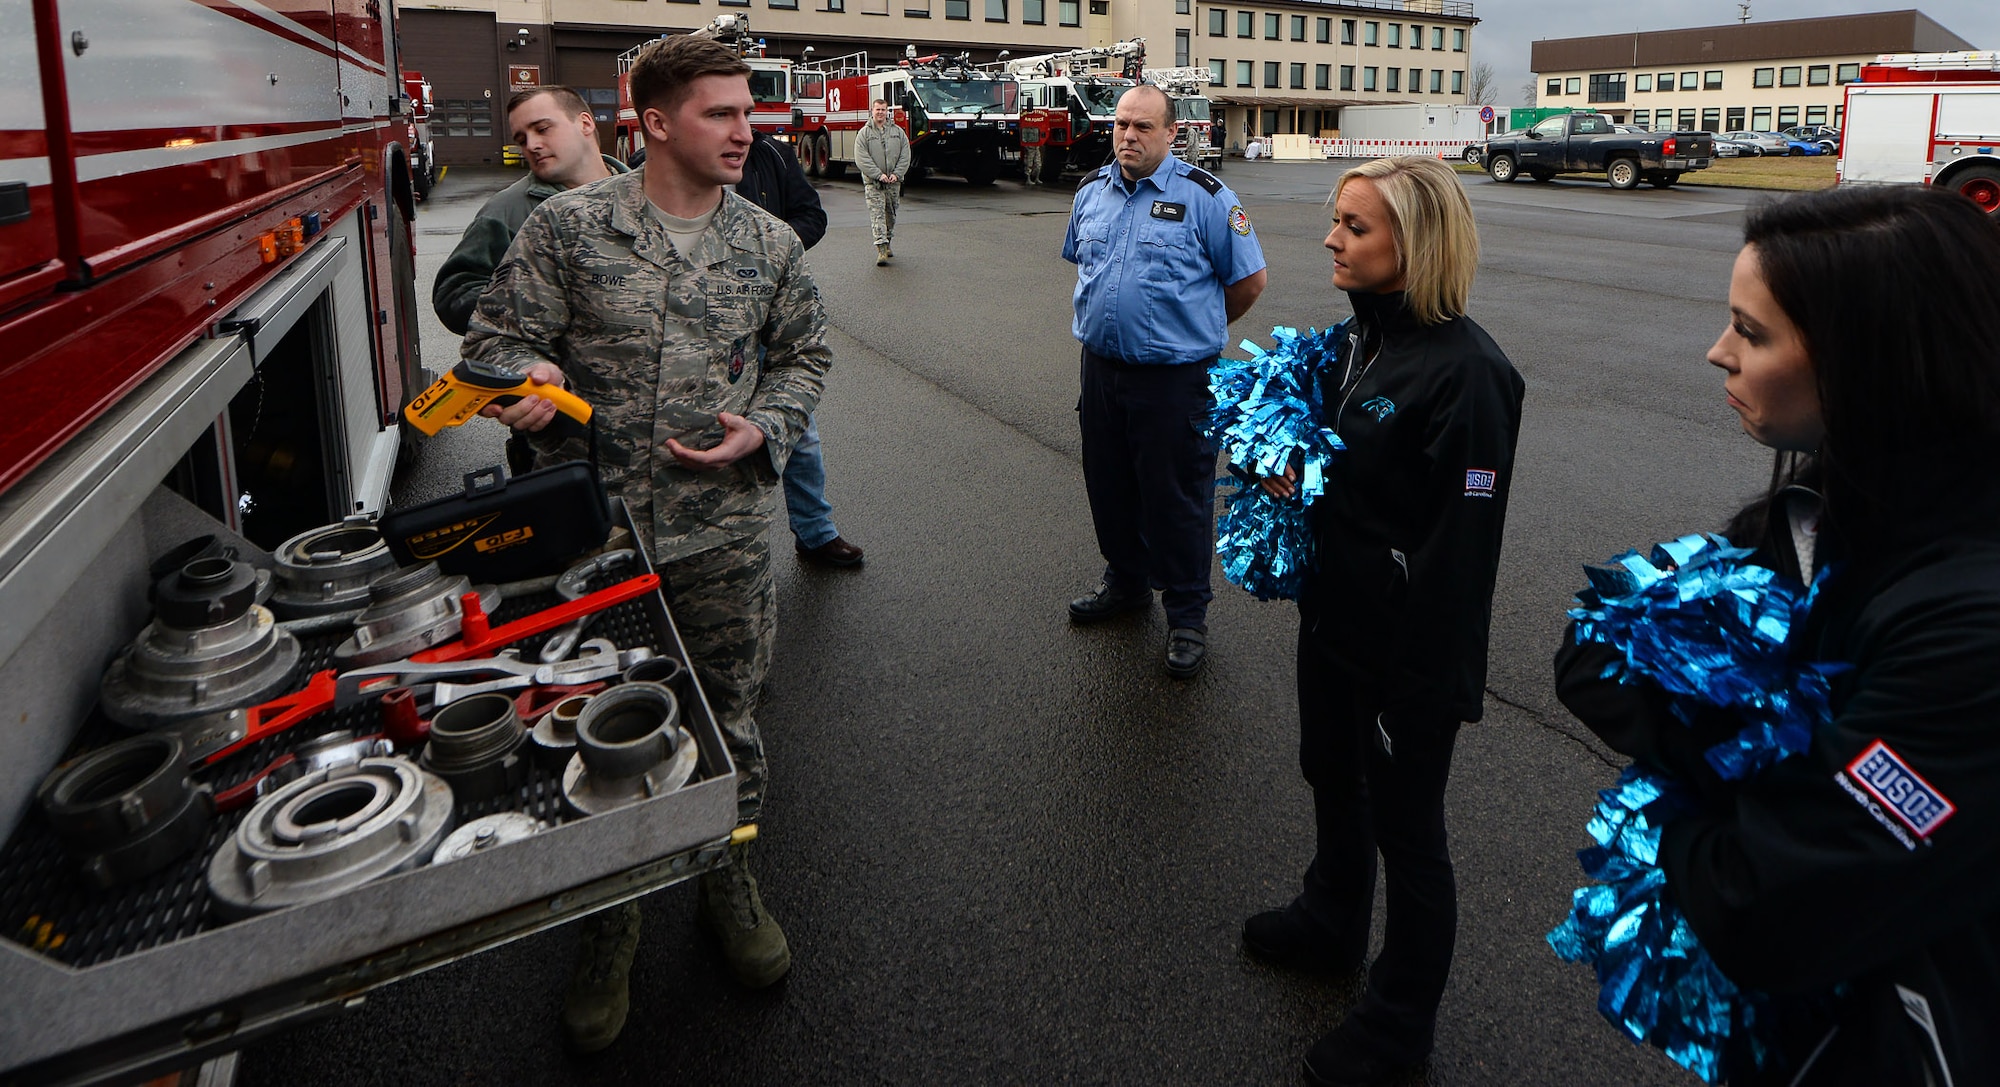 Senior Airman Stephen Bowe, 86th Civil Engineer Squadron firefighter, explains uses of the many tools on-board a fire engine to Carolina Panthers Top Cat cheerleaders Chandalae Lanouette and Megan Schlosser at Fire Station one on Ramstein Air Base, Germany, Mar. 7, 2017. While visiting Fire Station one the players and cheerleaders were allowed to view a simulated building fire response. (U.S. Air Force photo by Airman 1st Class D. Blake Browning)